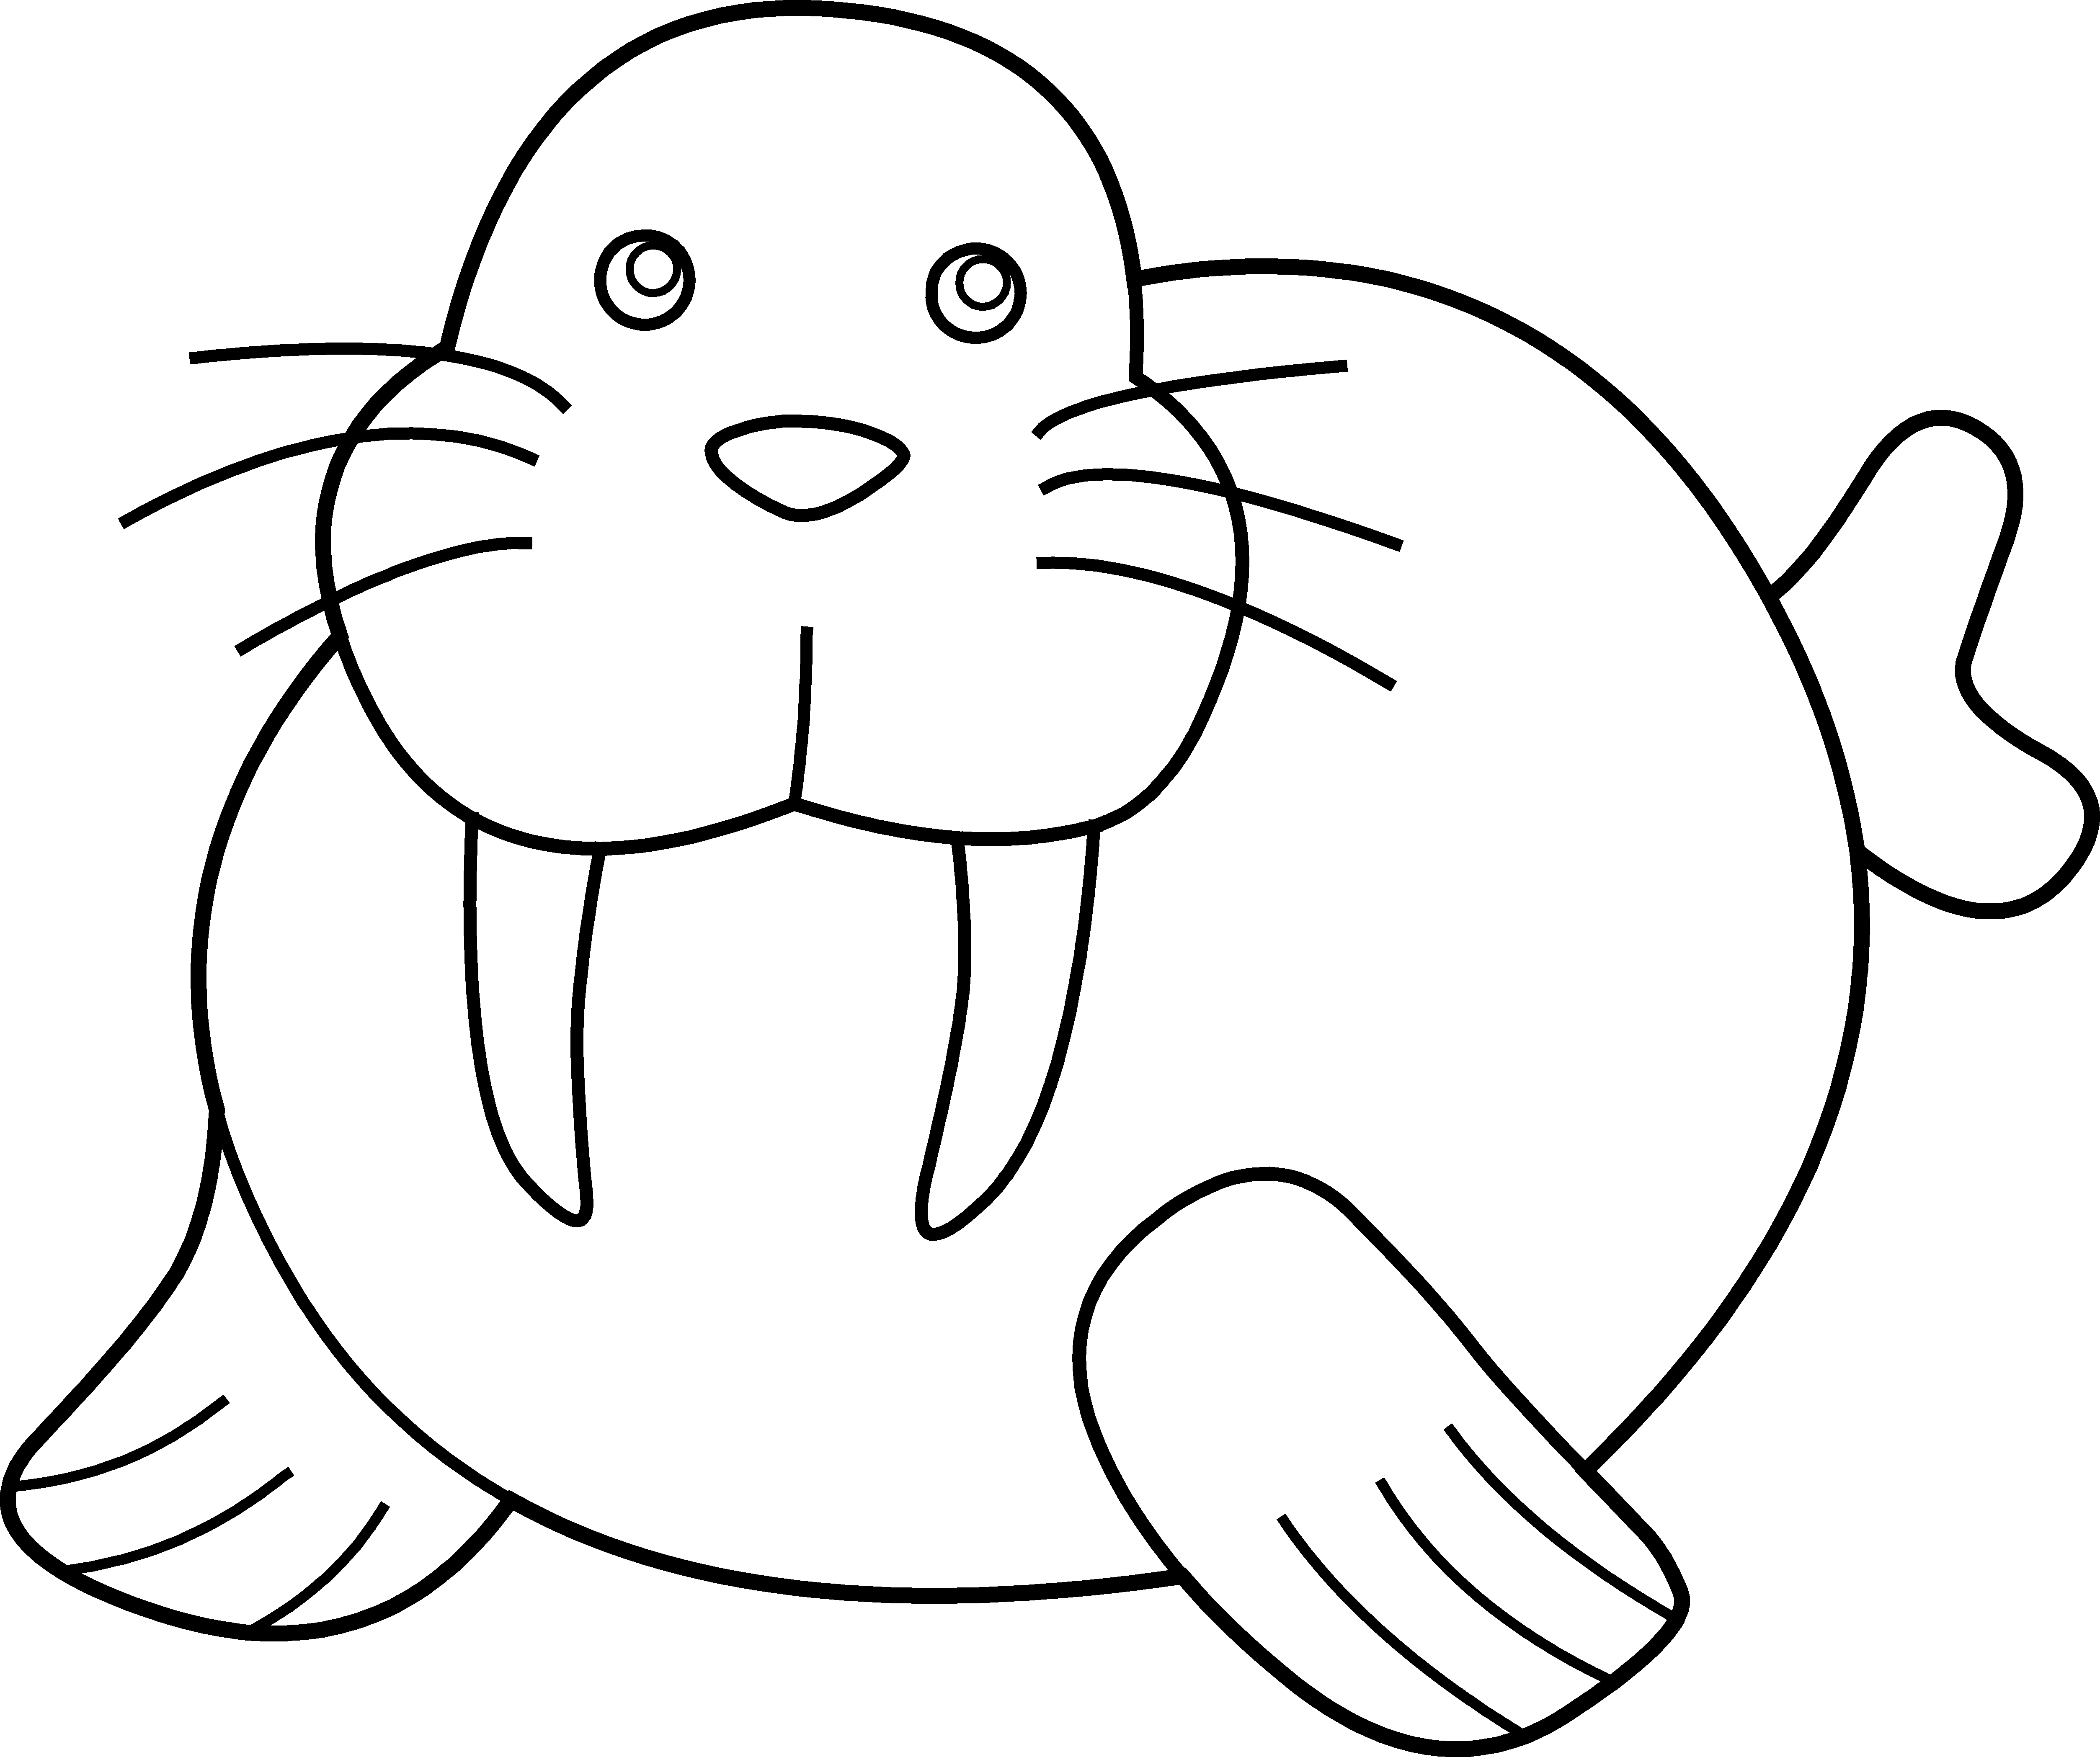 Ocean panda free images. Zucchini clipart black and white